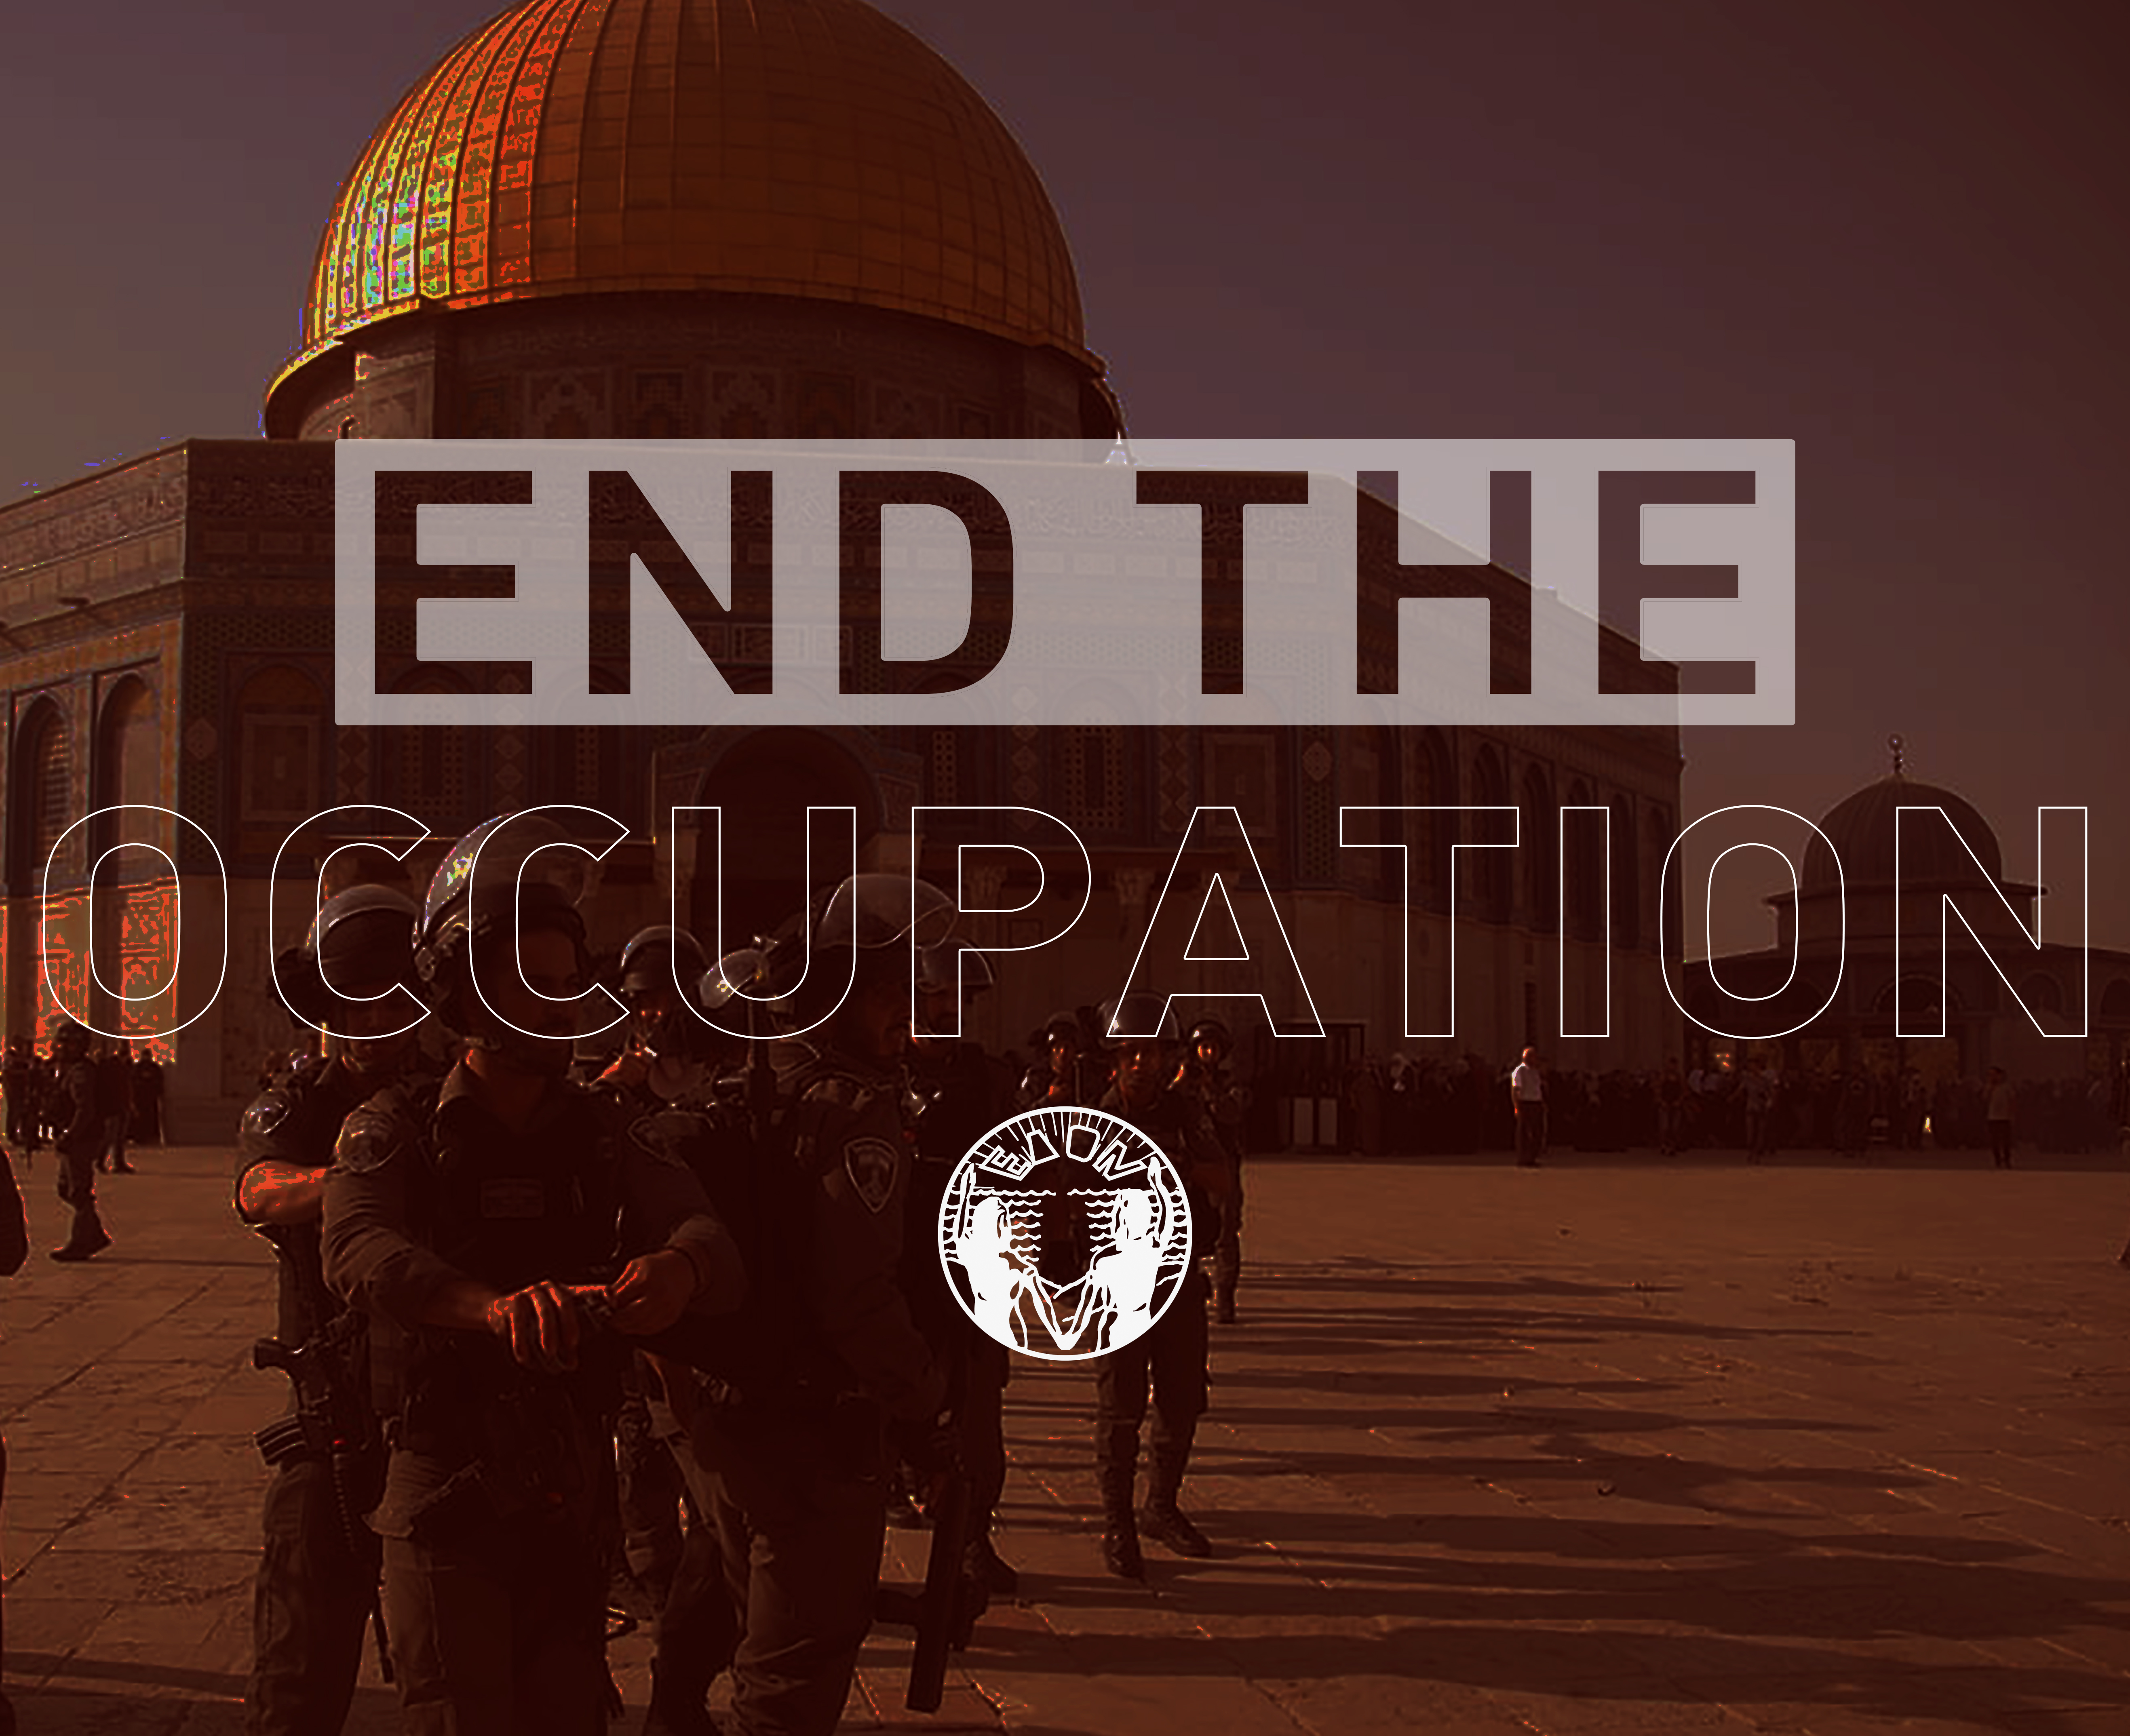 EDON for the new escalation of violence against the Palestinian people